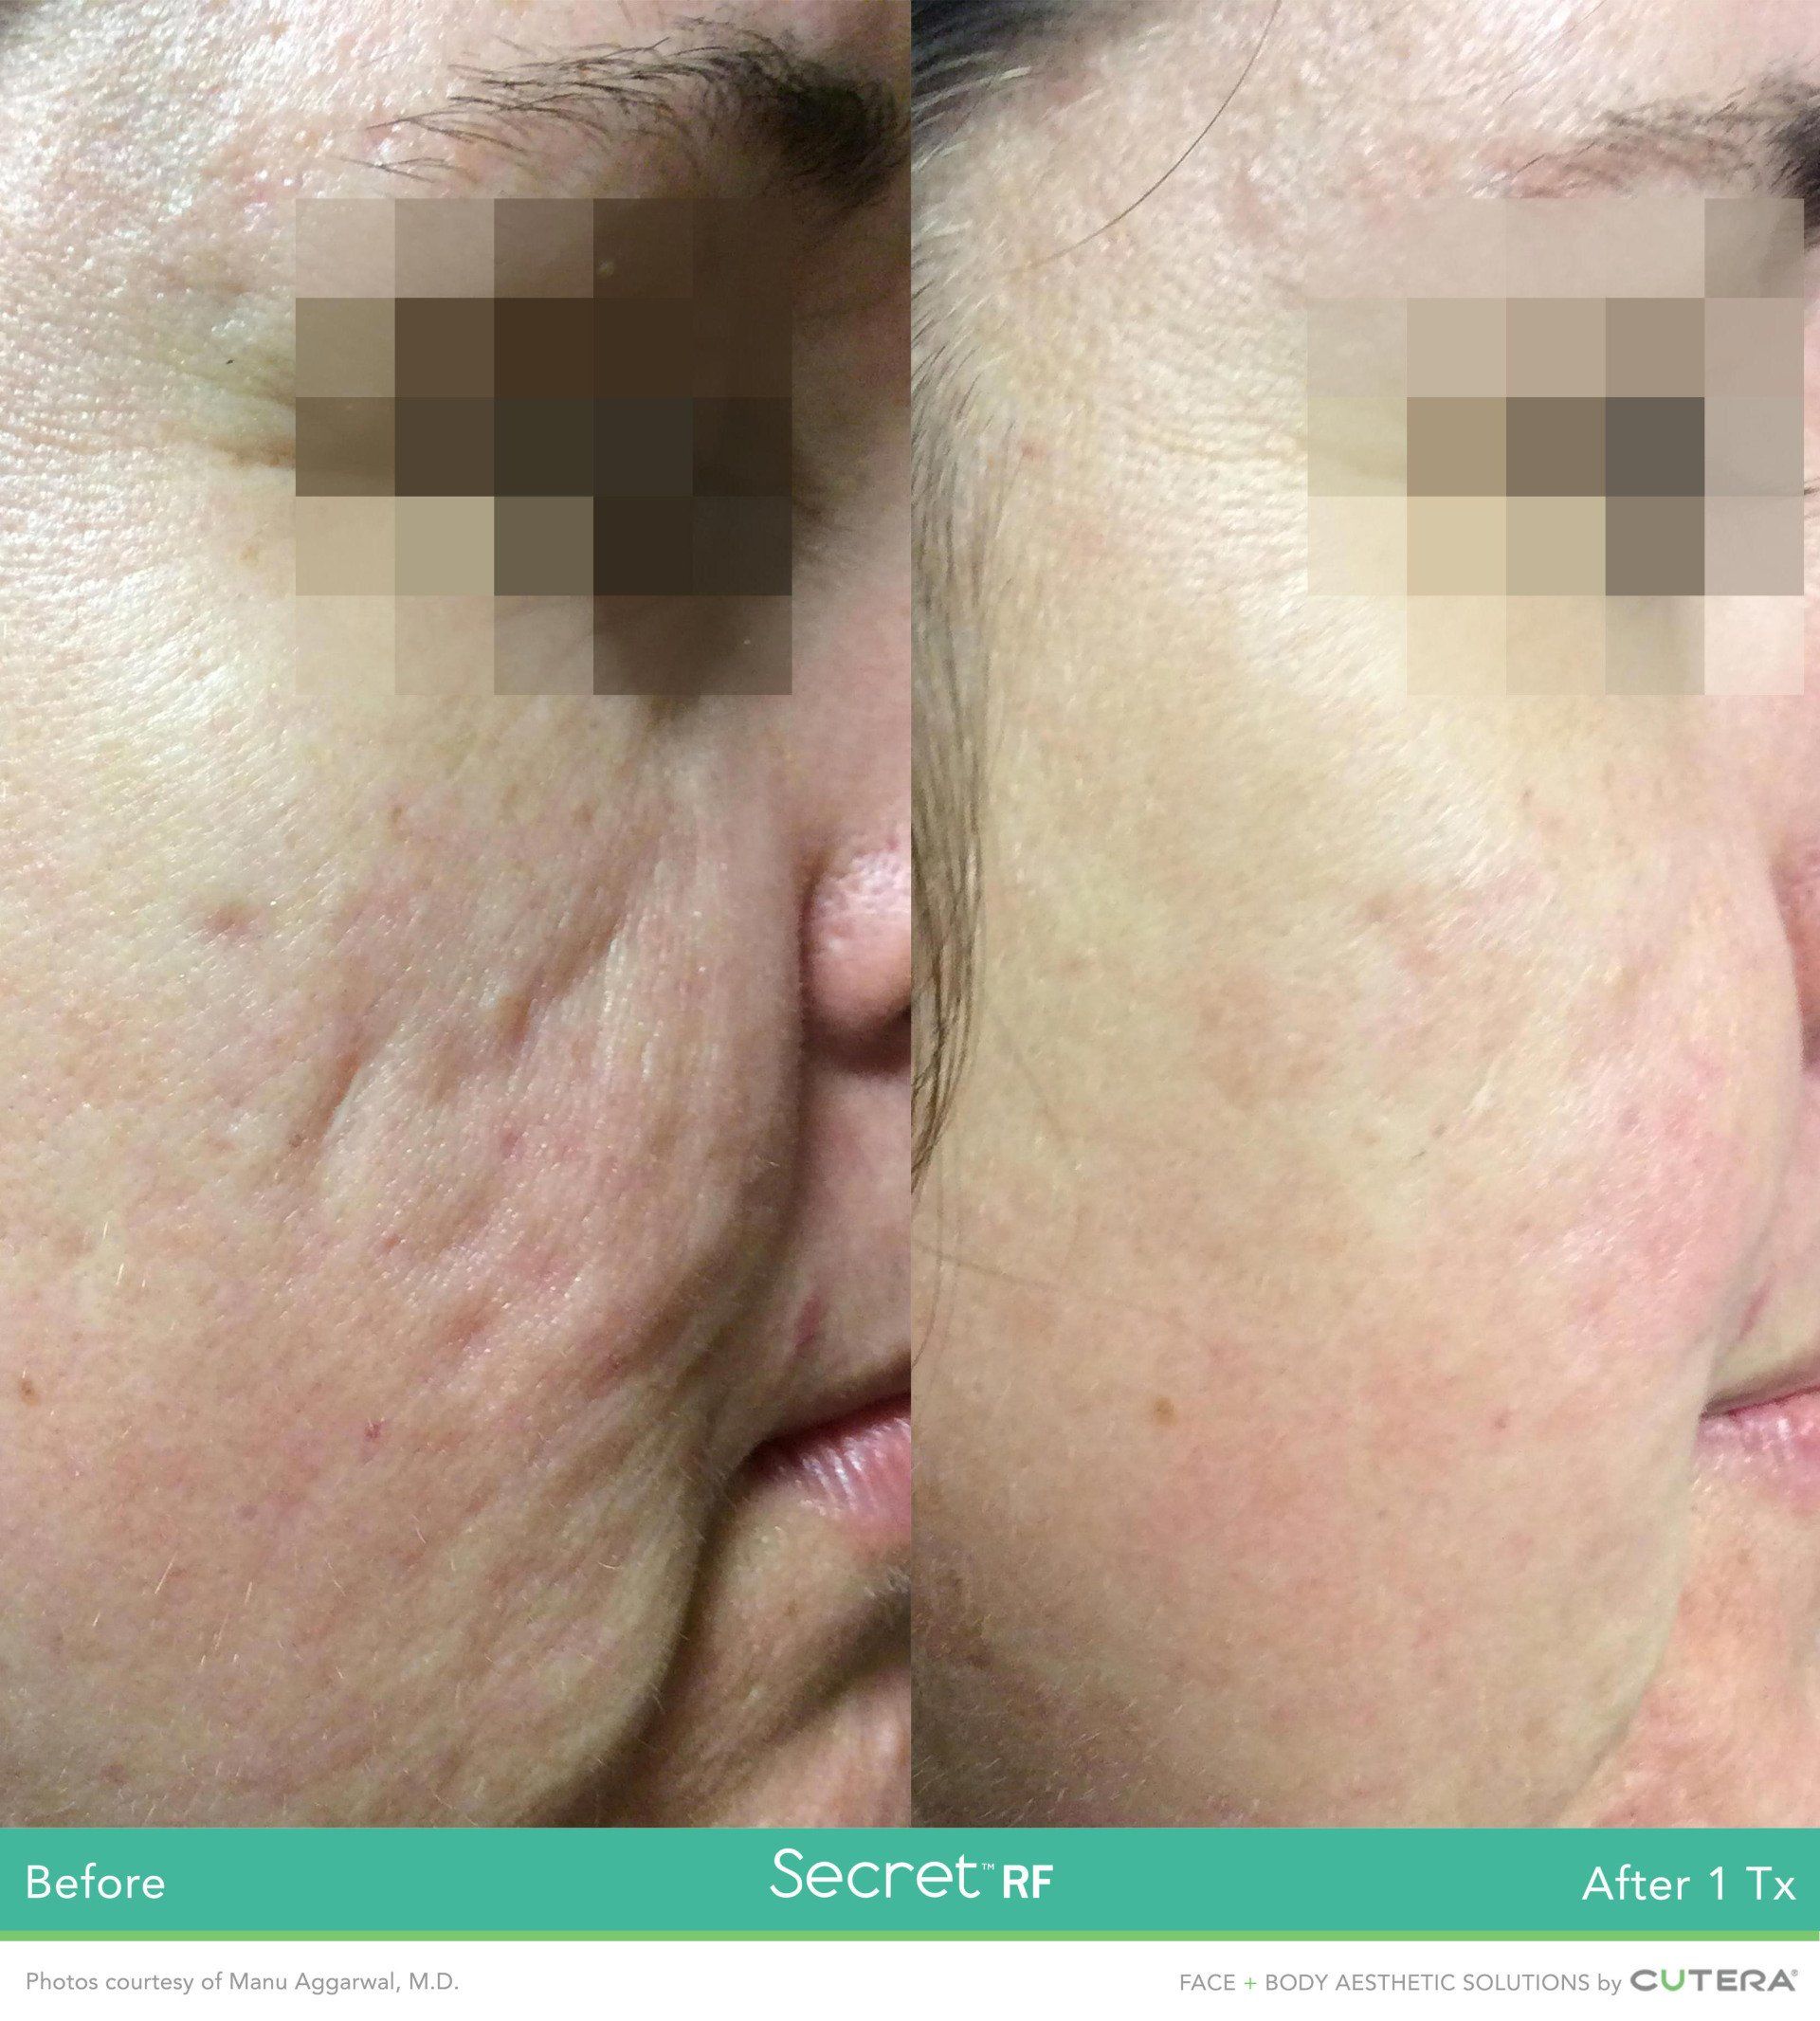 Close up photo of face before and after Secret RF